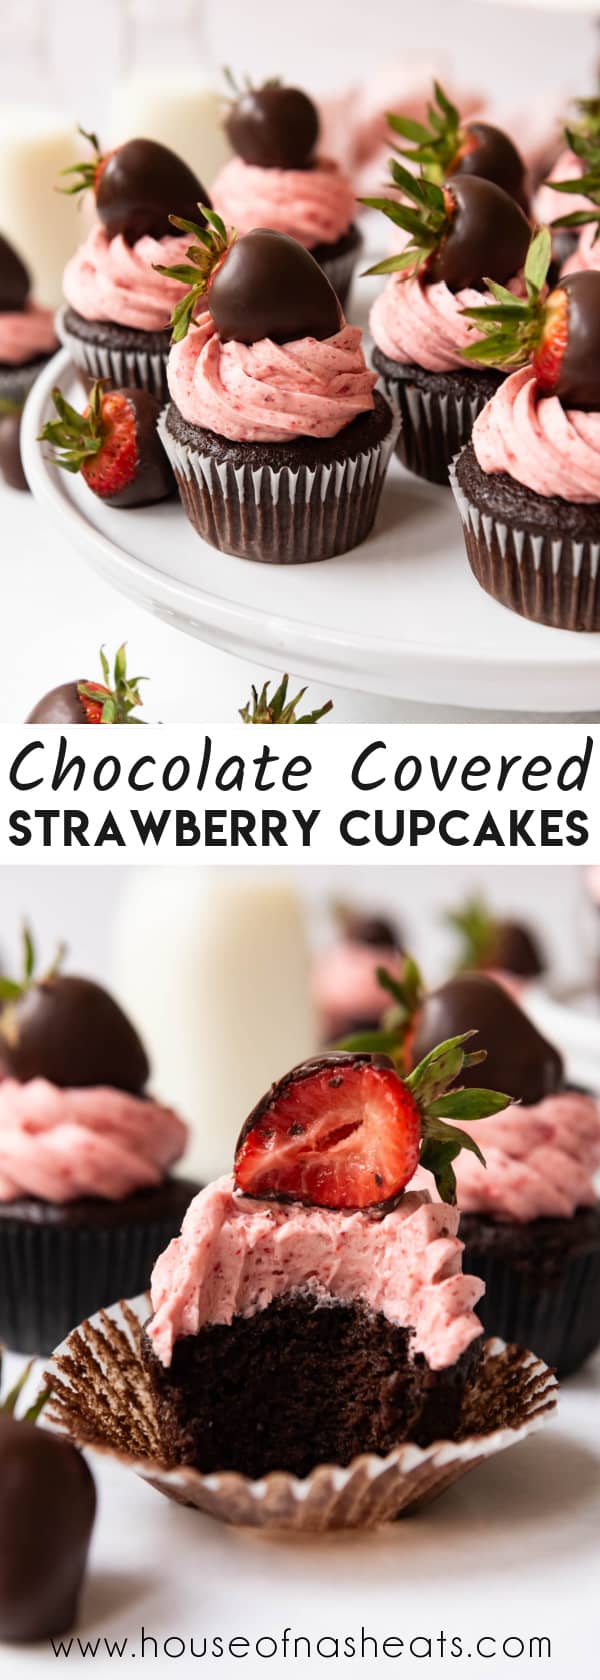 A collage of images of chocolate covered strawberry cupcakes with text overlay.